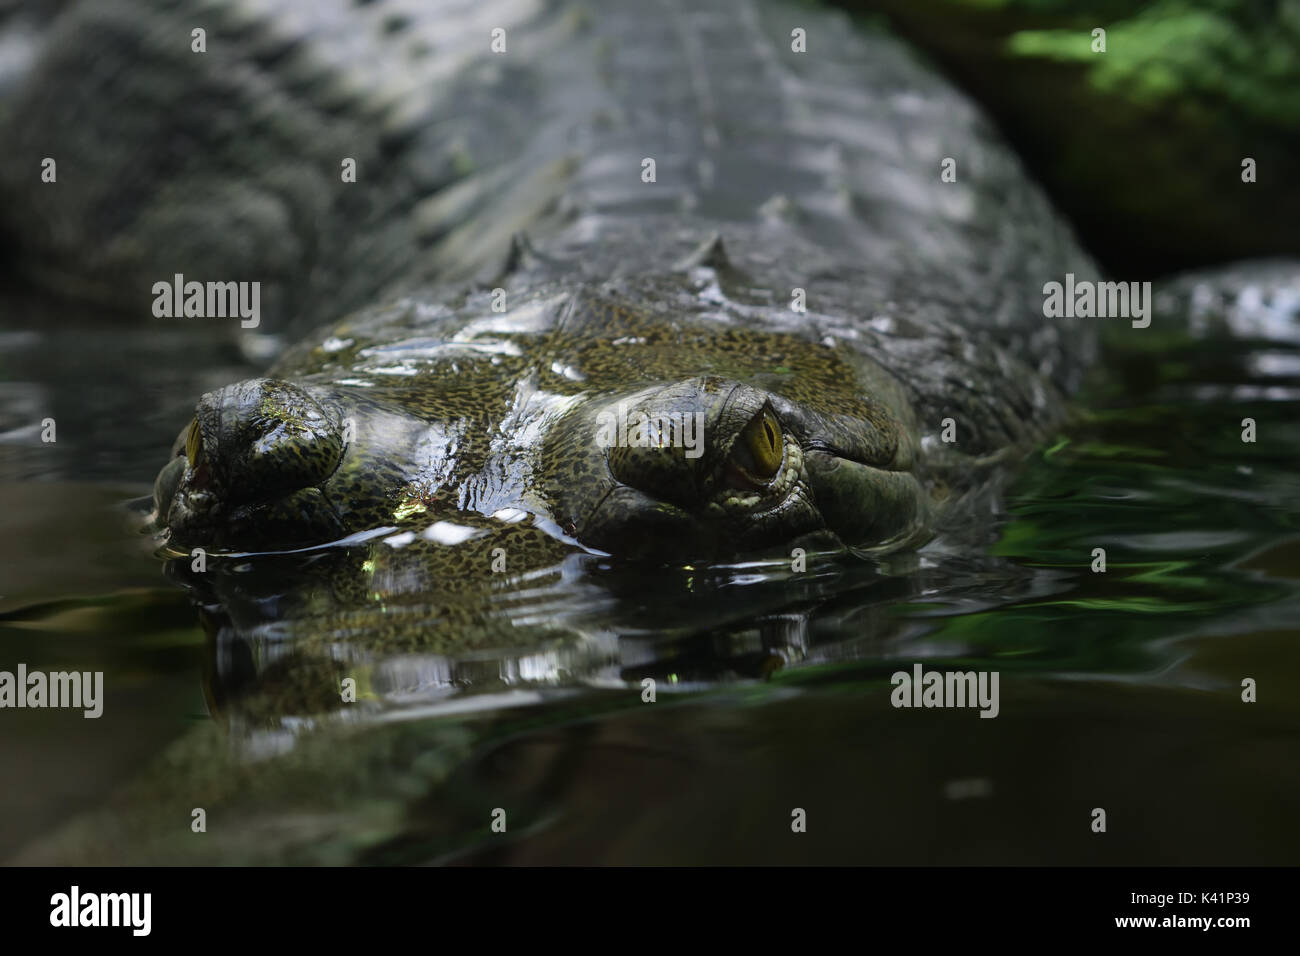 Close up of eyes and body of gharial (gavial) in water Stock Photo